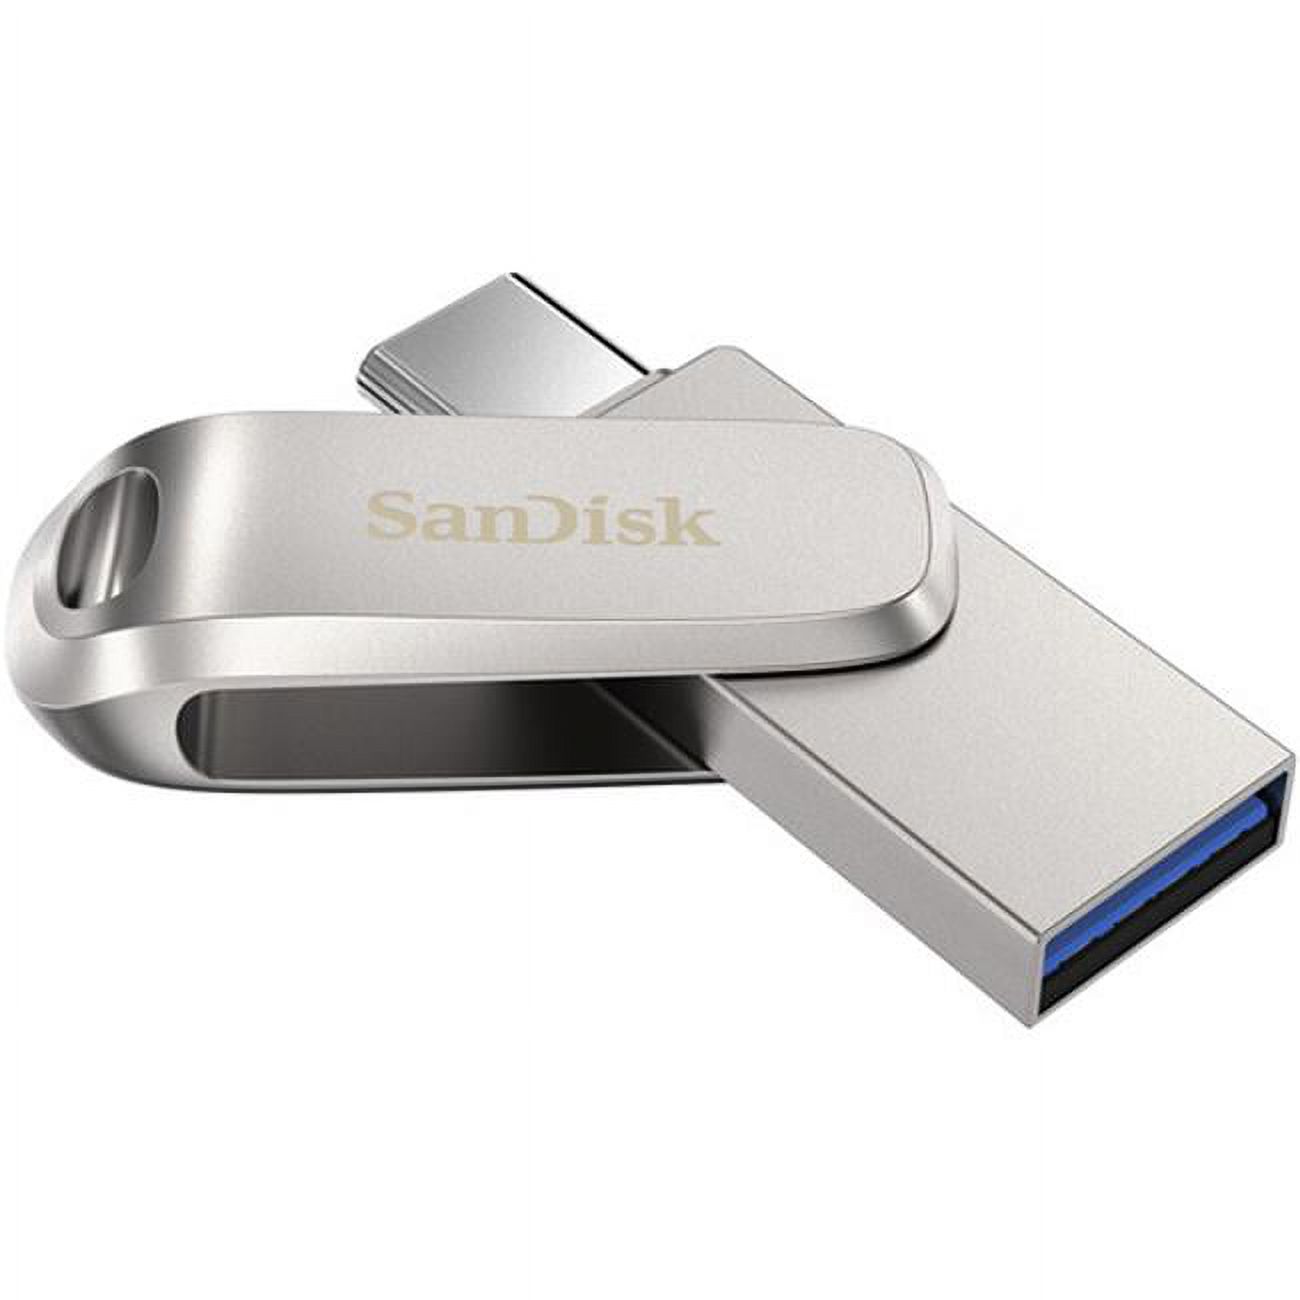 Sandisk SDDDC4-064G-A46 Type-C Ginseng Am USB 3.1 Flash Drive - image 1 of 5